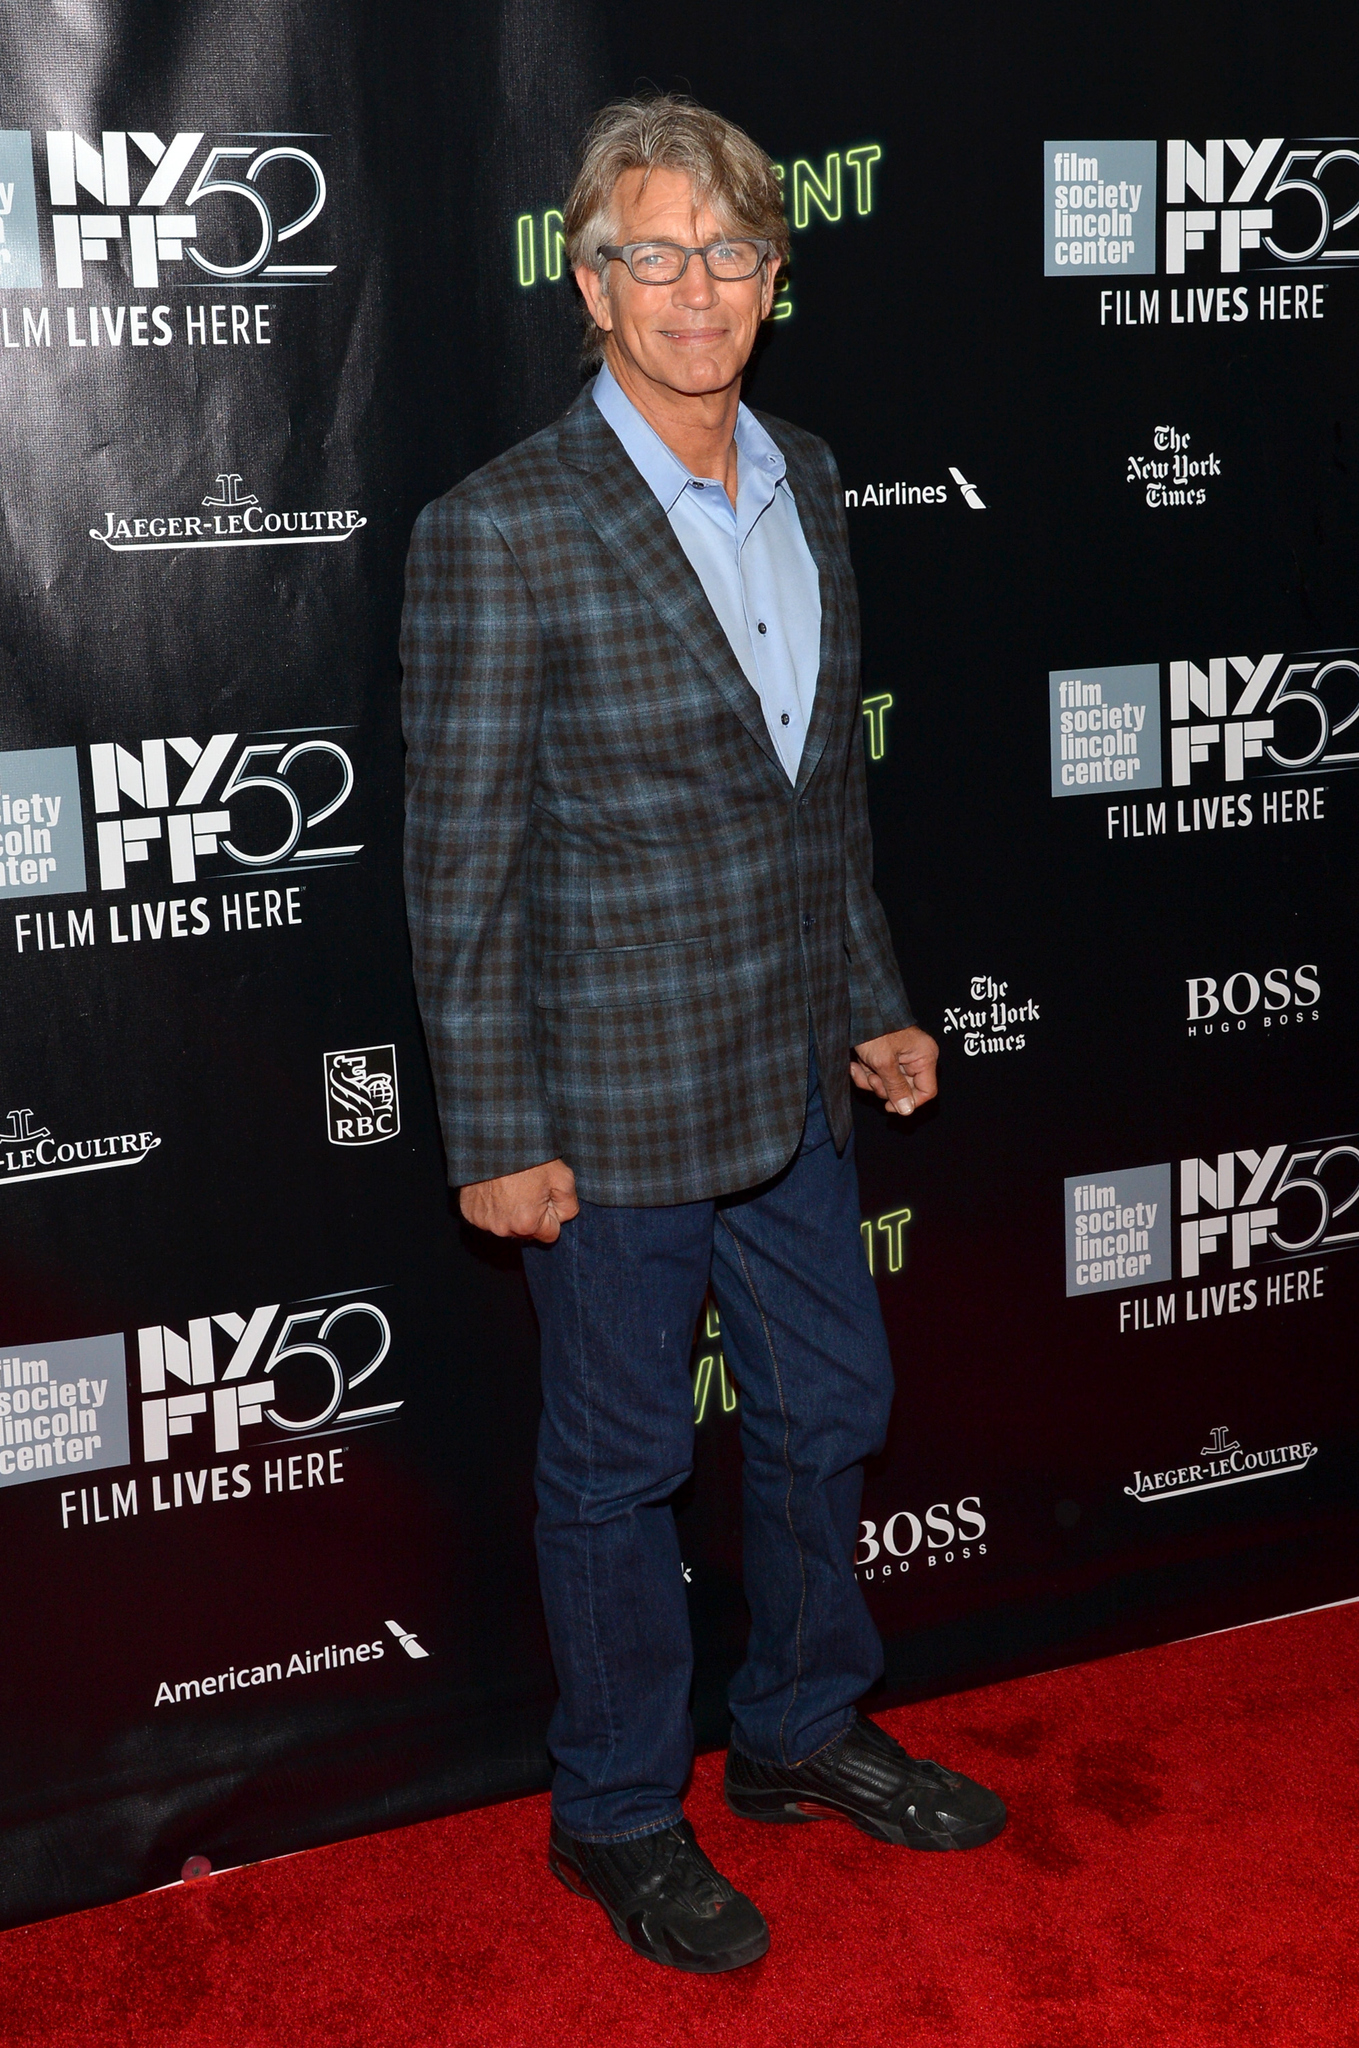 Eric Roberts at event of Zmogiska silpnybe (2014)